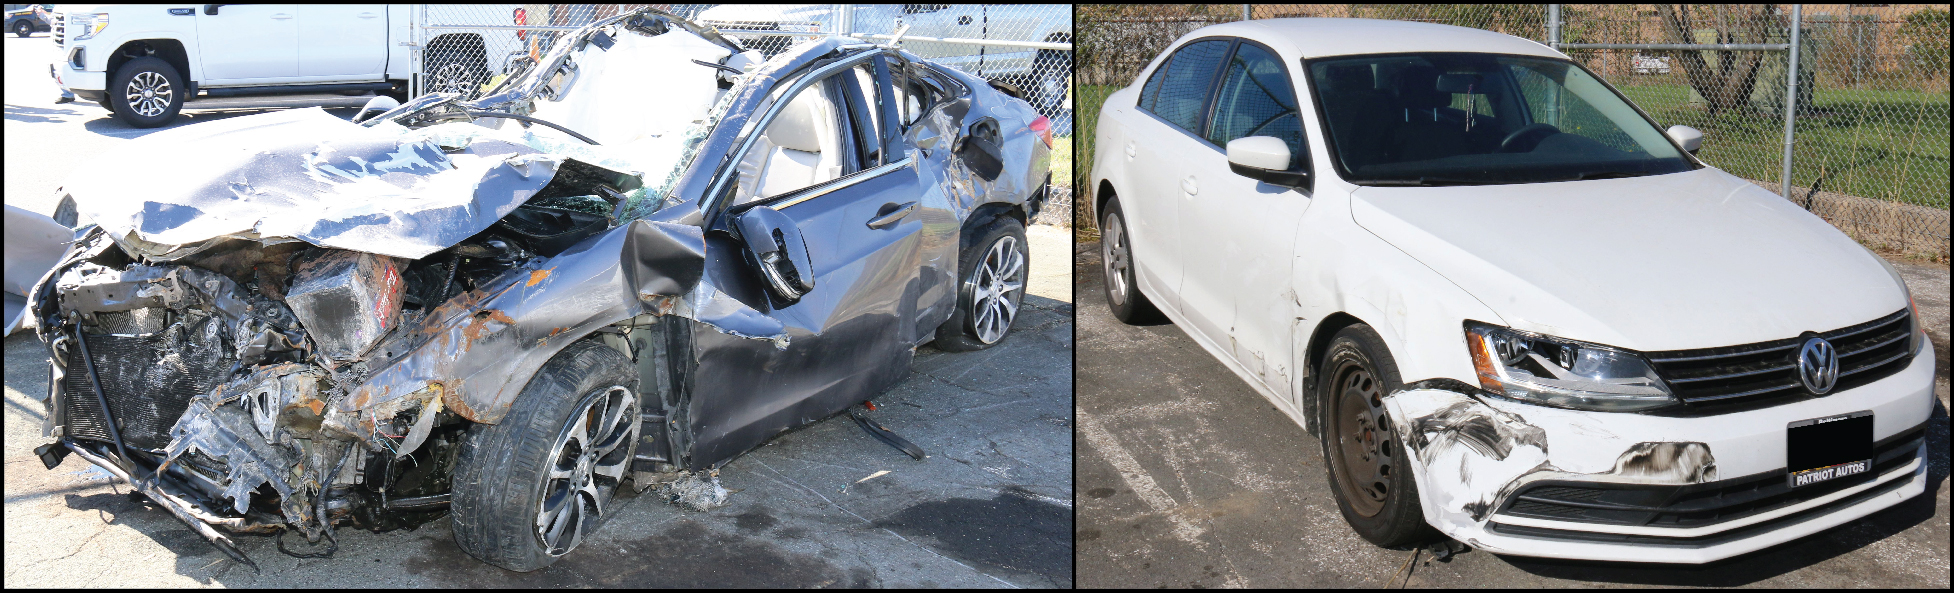 Postcrash photographs of the vehicles involved in the crash. The 2017 Acura TLX is shown on the left and the 2017 Volkswagen Jet